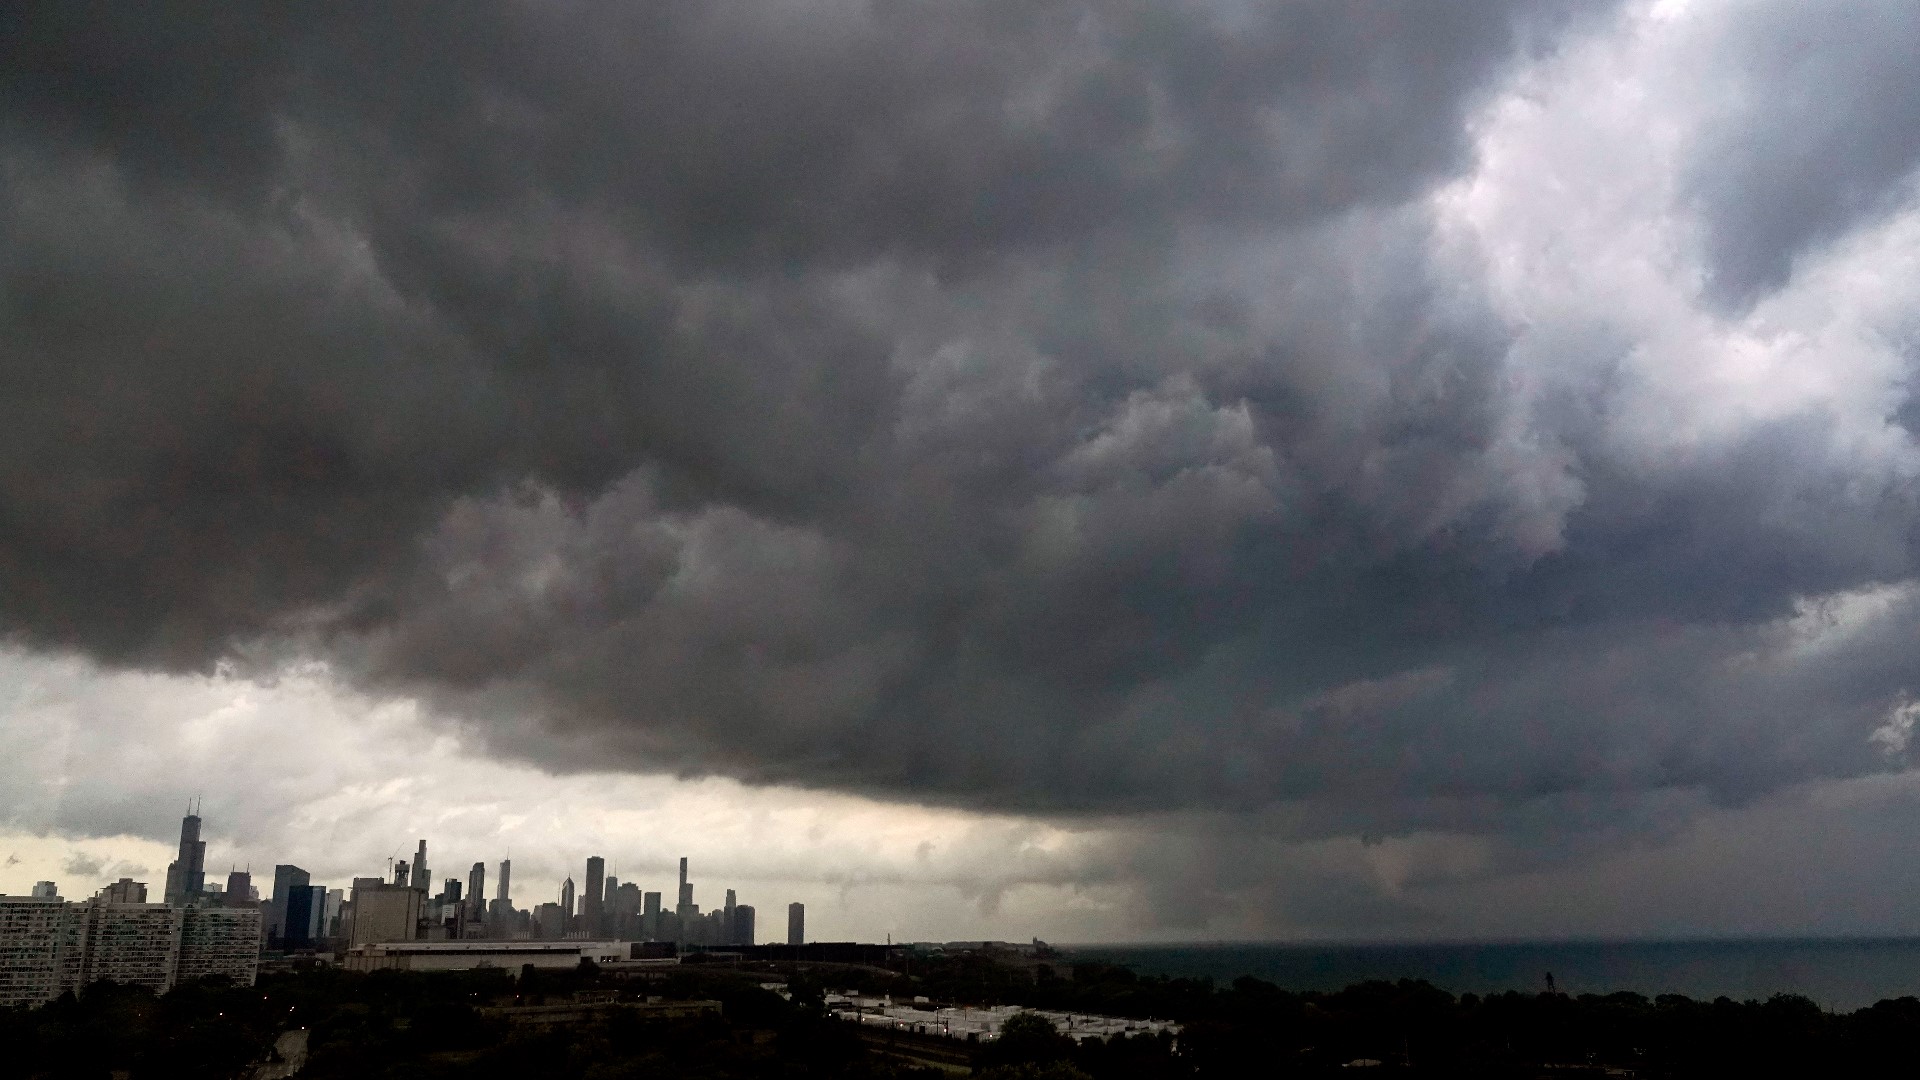 A tornado touched down on Wednesday evening near Chicago’s O’Hare International Airport, prompting passengers to take shelter and disrupting hundreds of flights.